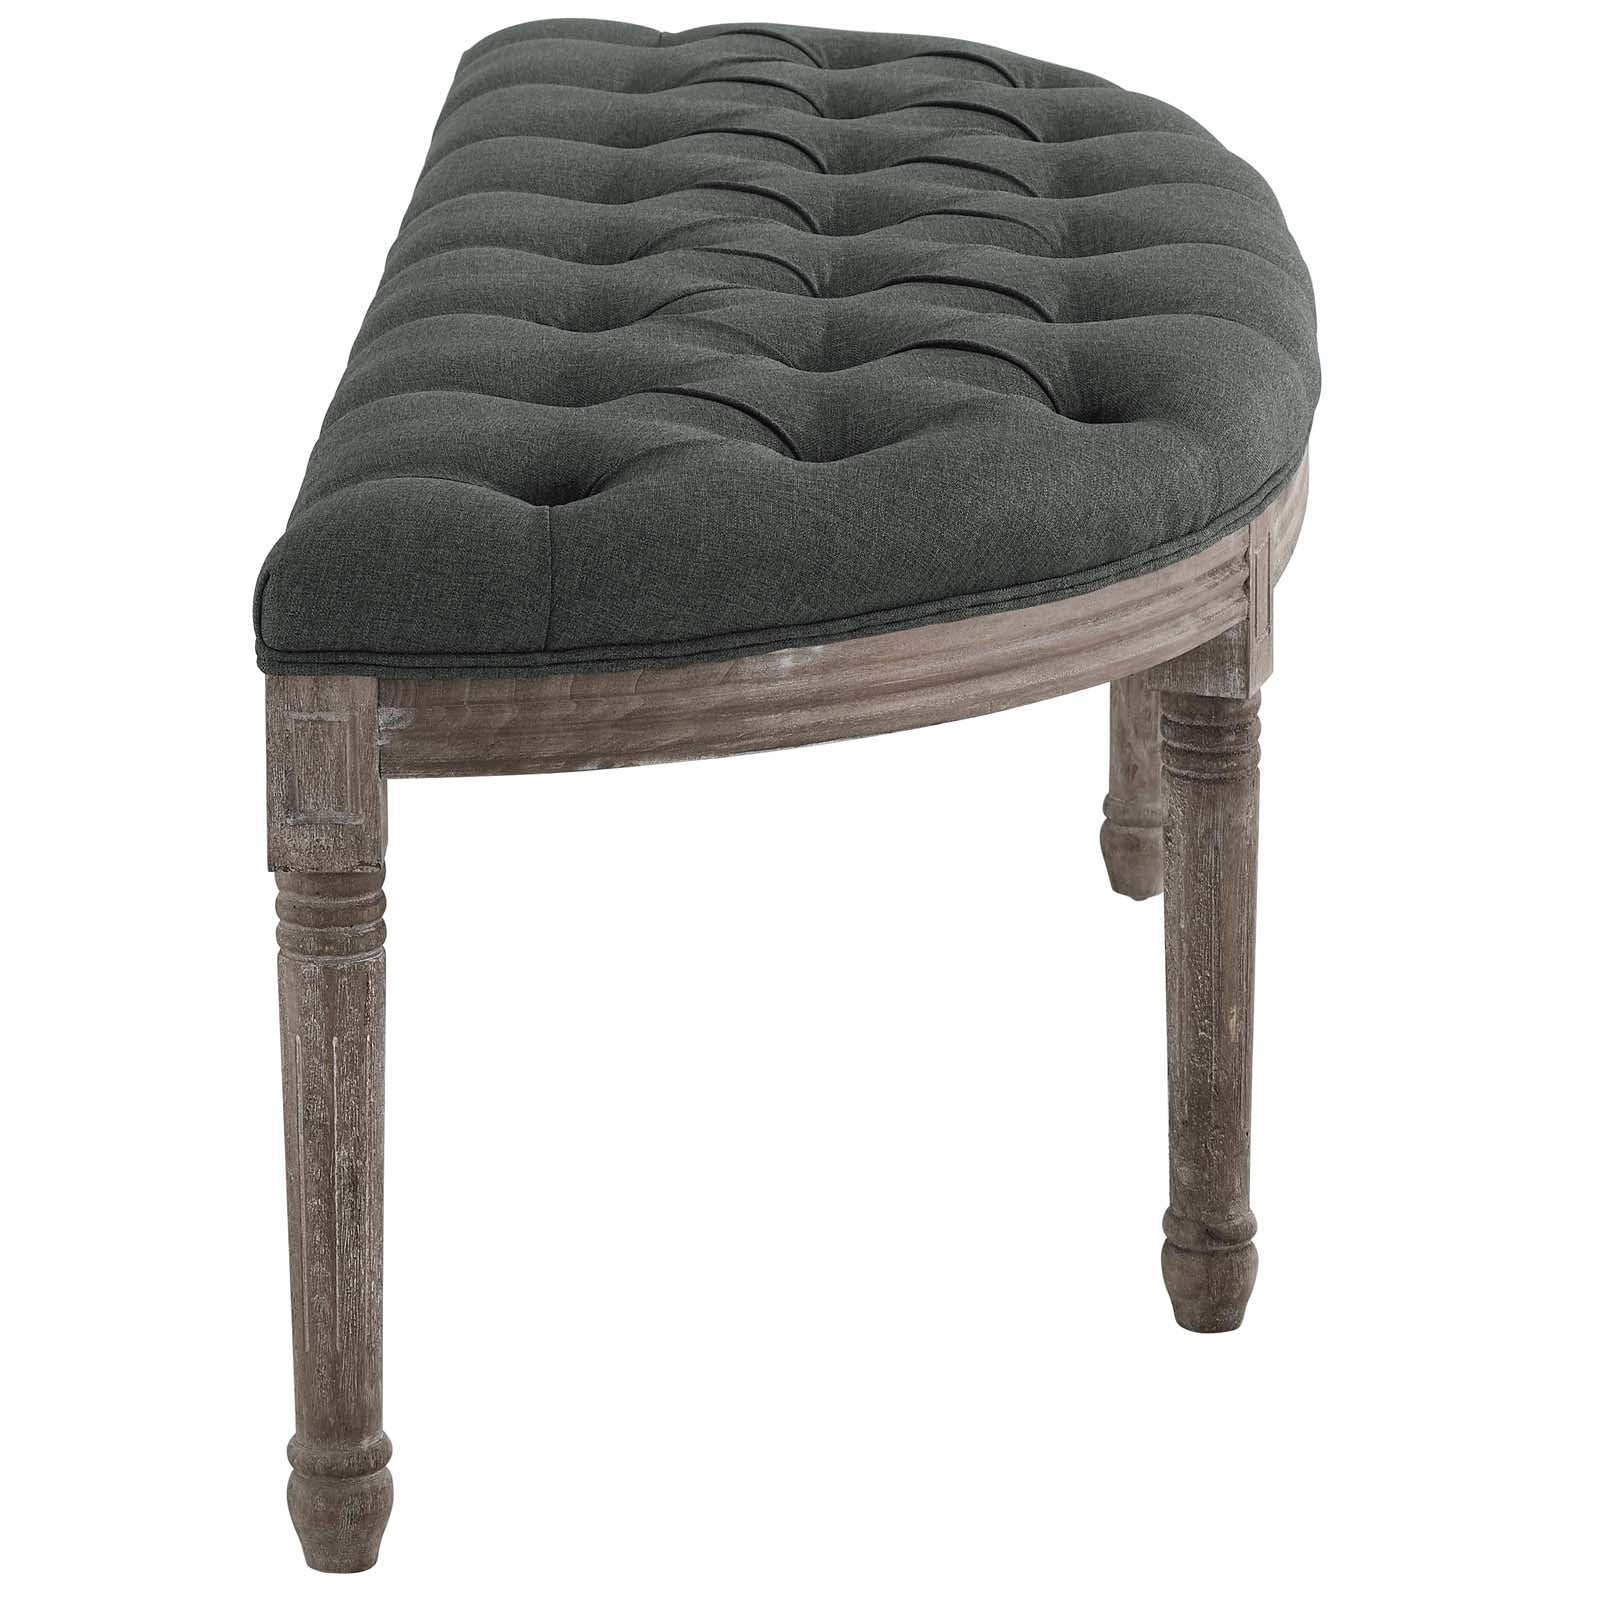 Esteem Vintage French Upholstered Fabric Semi-Circle Bench - East Shore Modern Home Furnishings